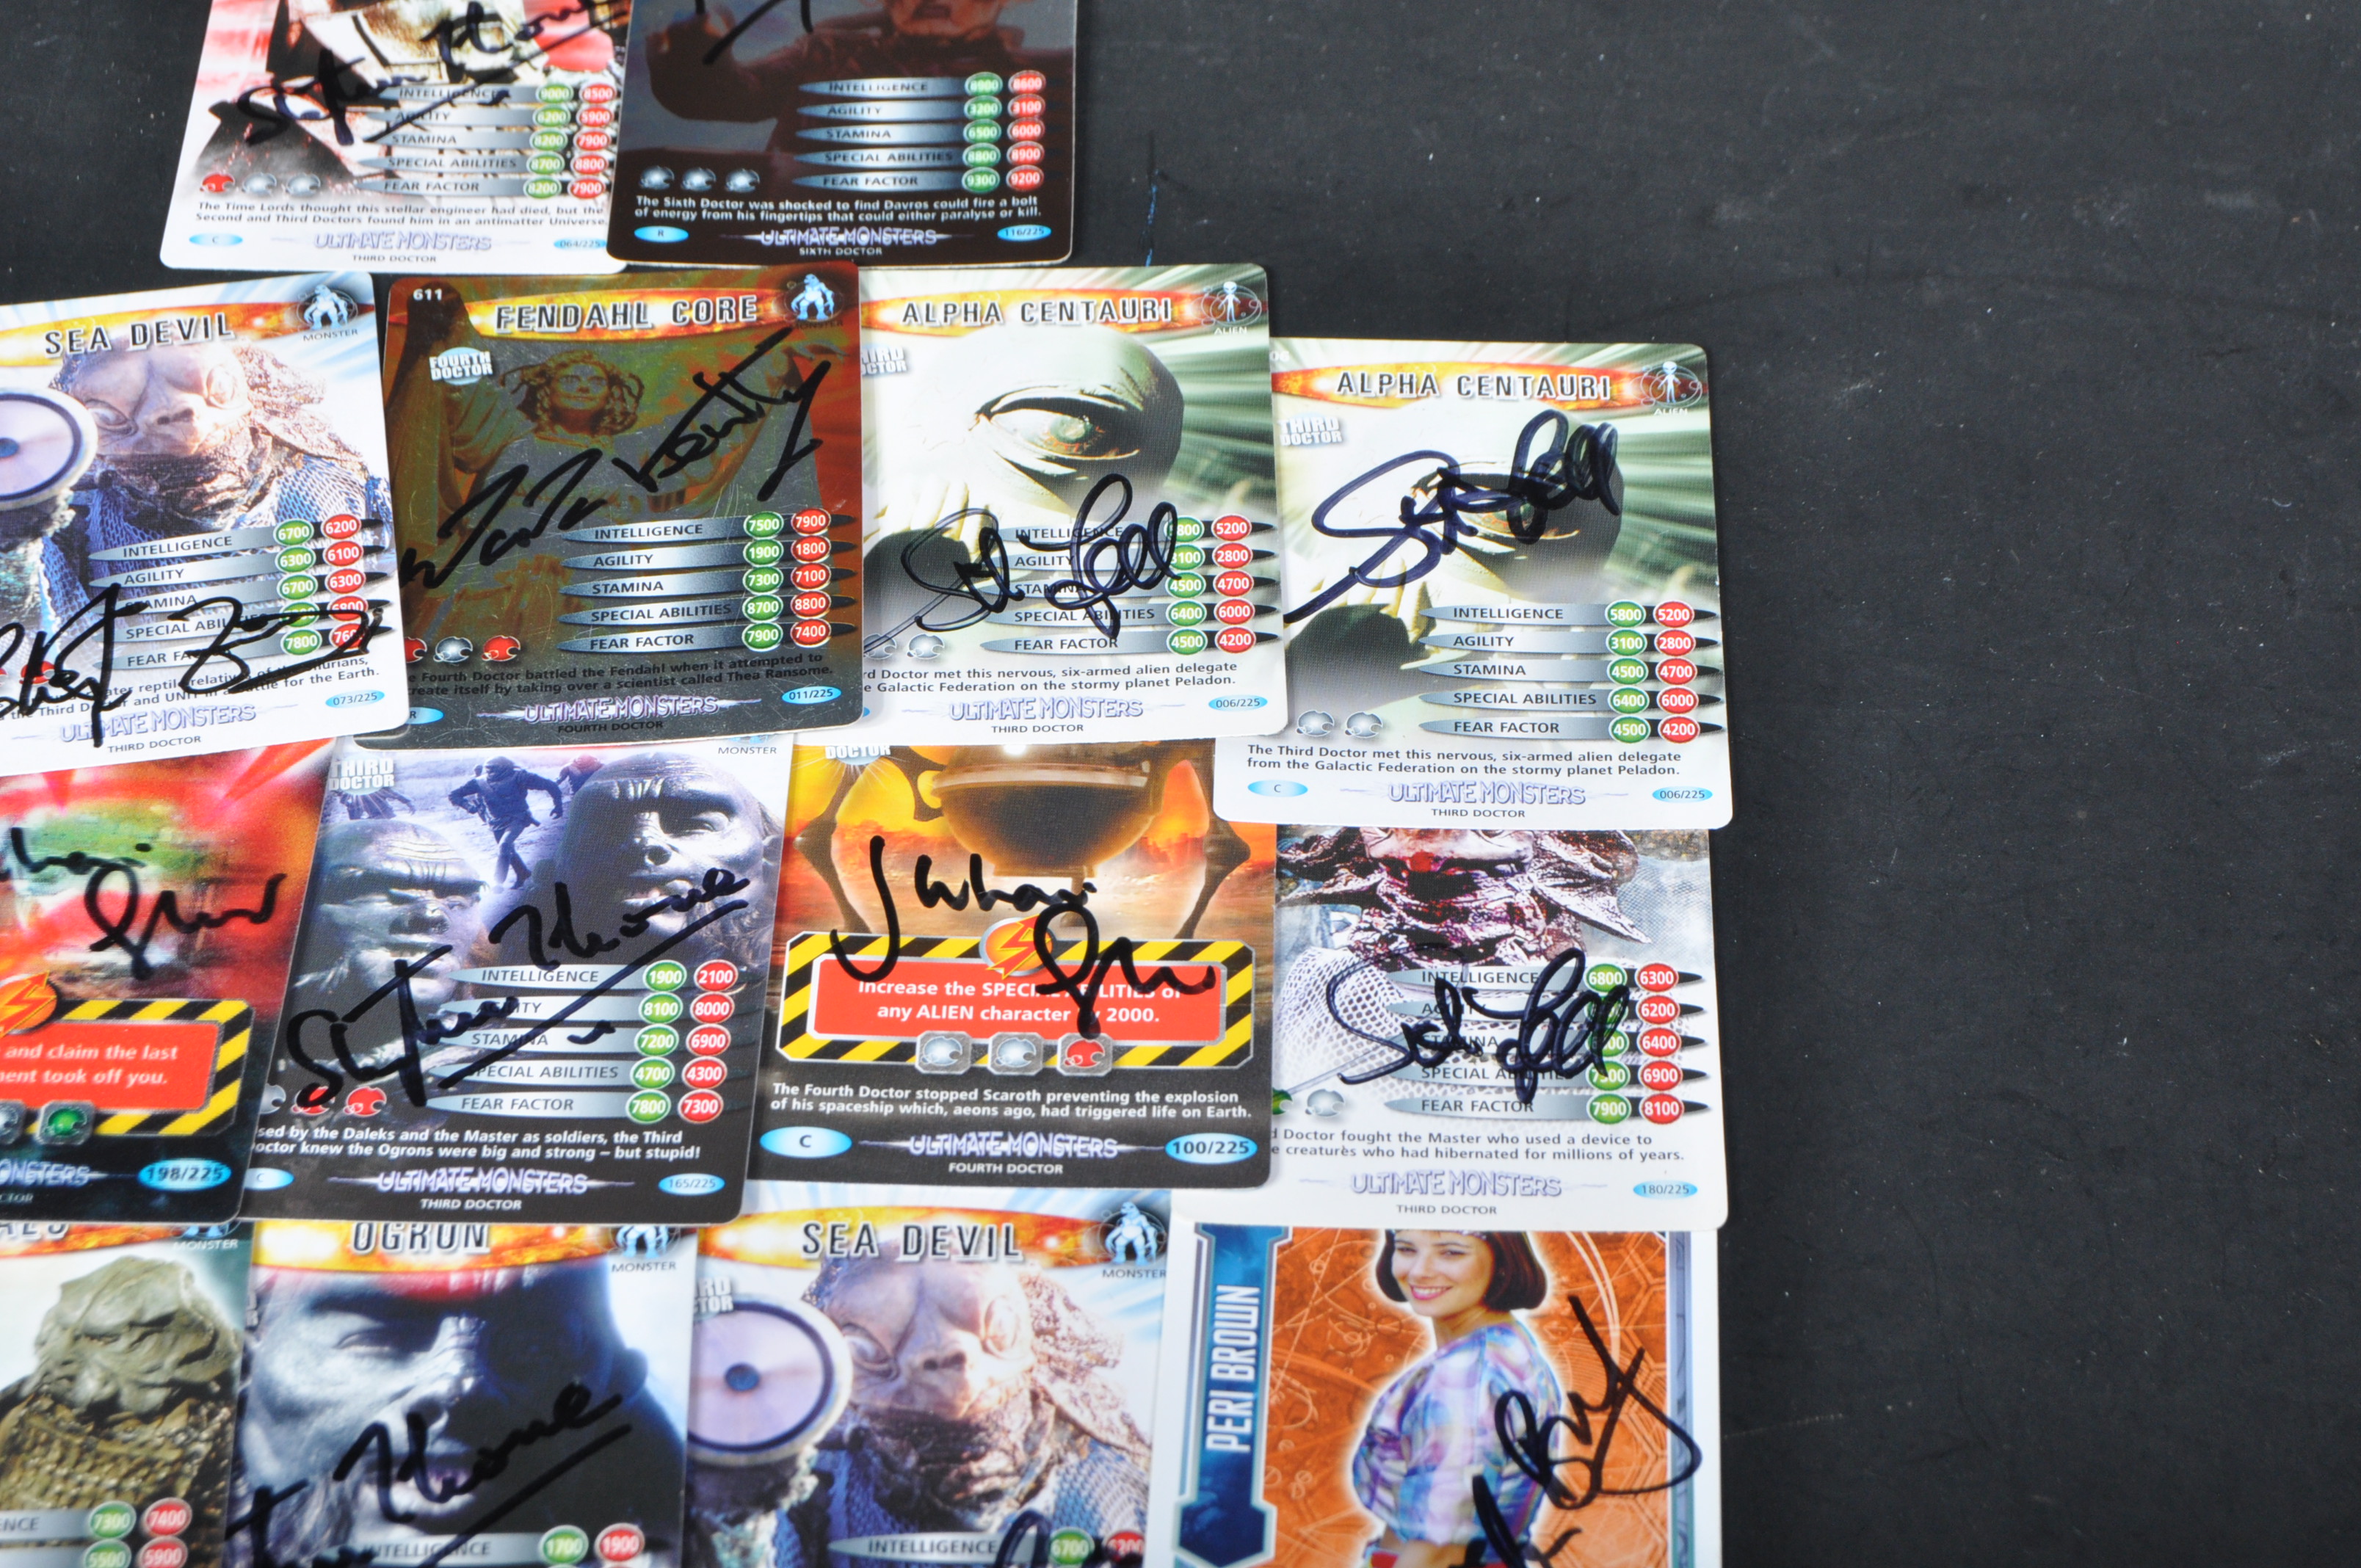 DOCTOR WHO - CLASSIC SERIES - AUTOGRAPHED TRADING CARDS - Image 5 of 7